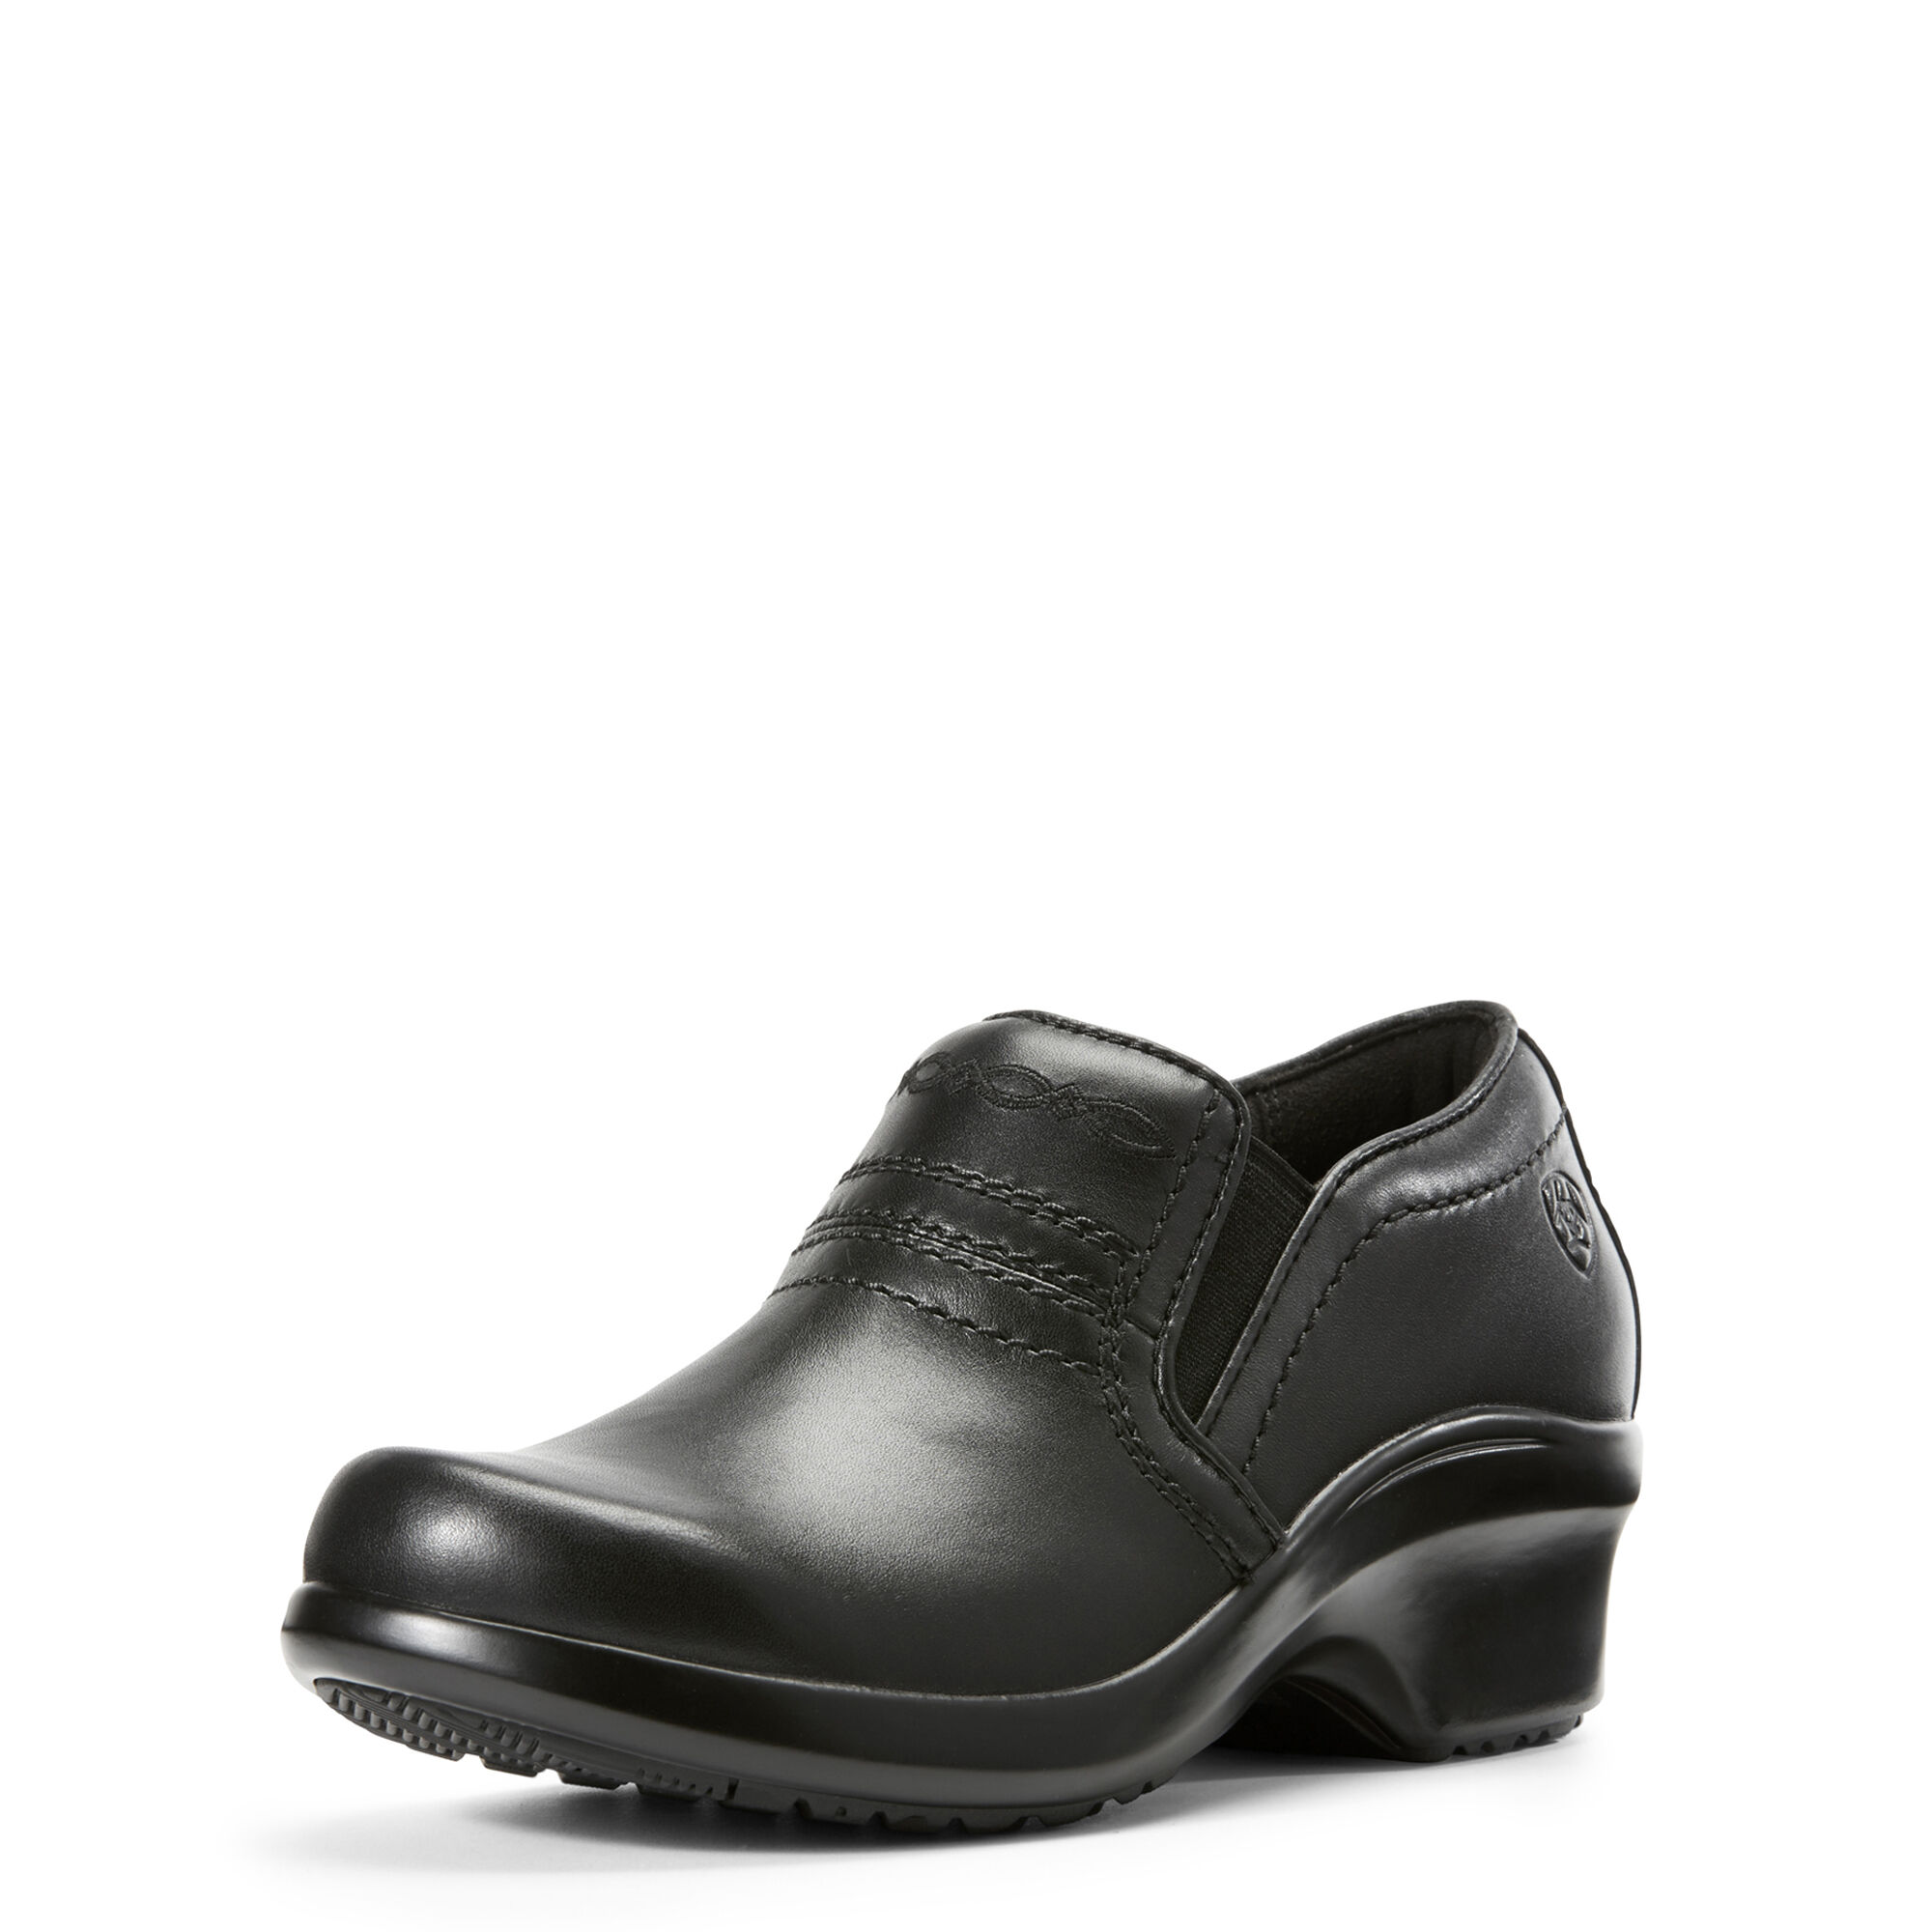 Women's Expert Clog SD Boots in Black Leather  by Ariat